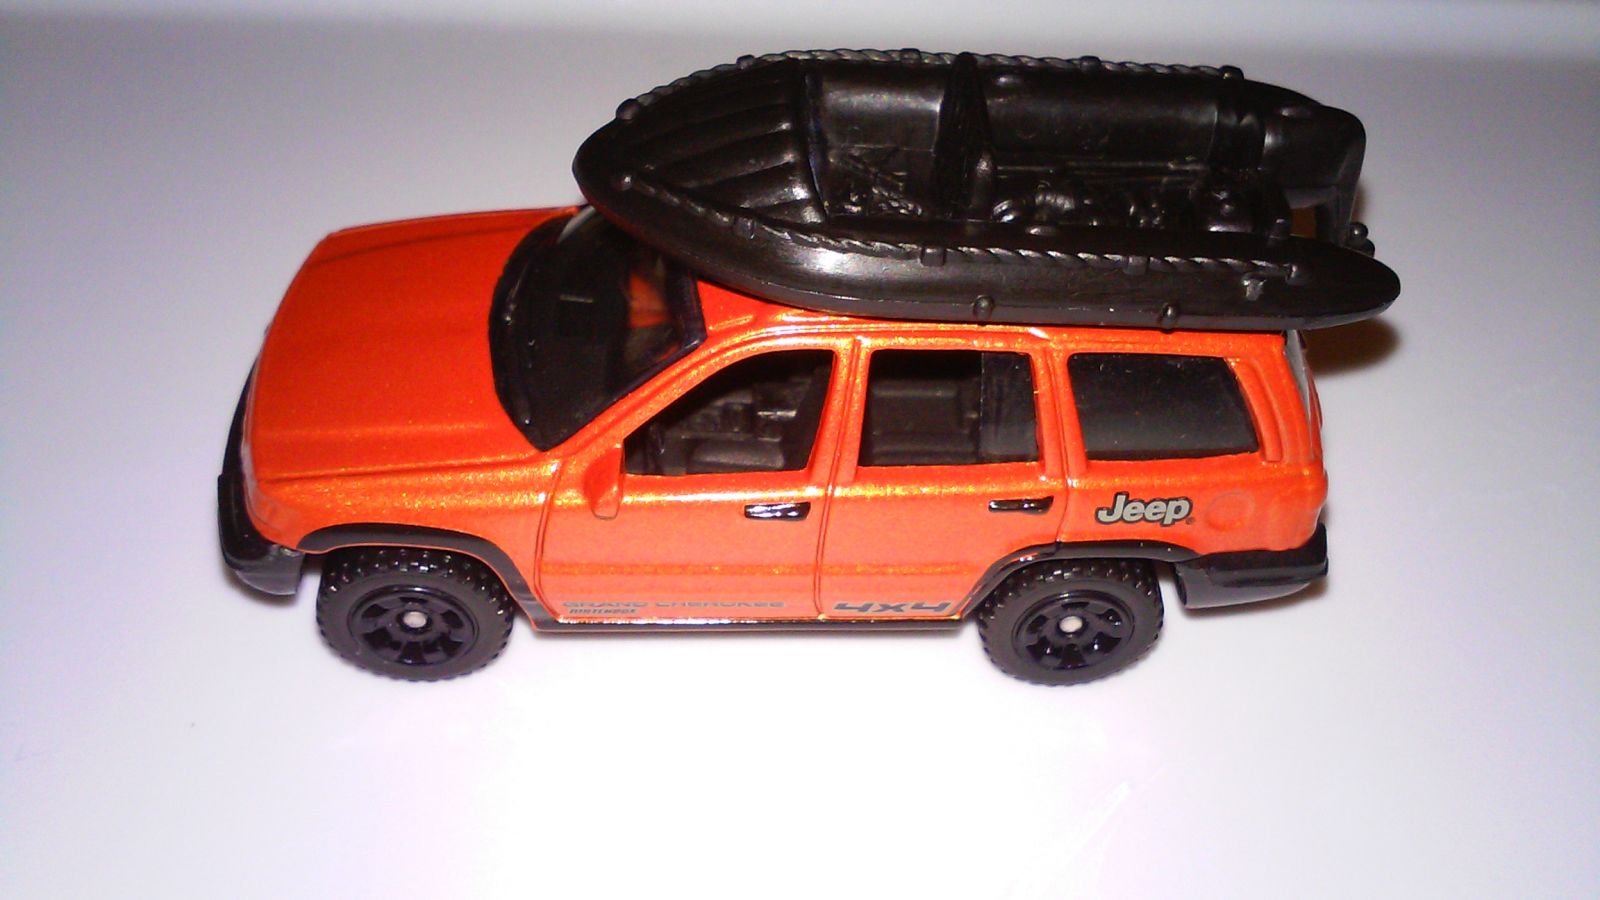 Illustration for article titled Matchbox Jeep Grand Cherokee